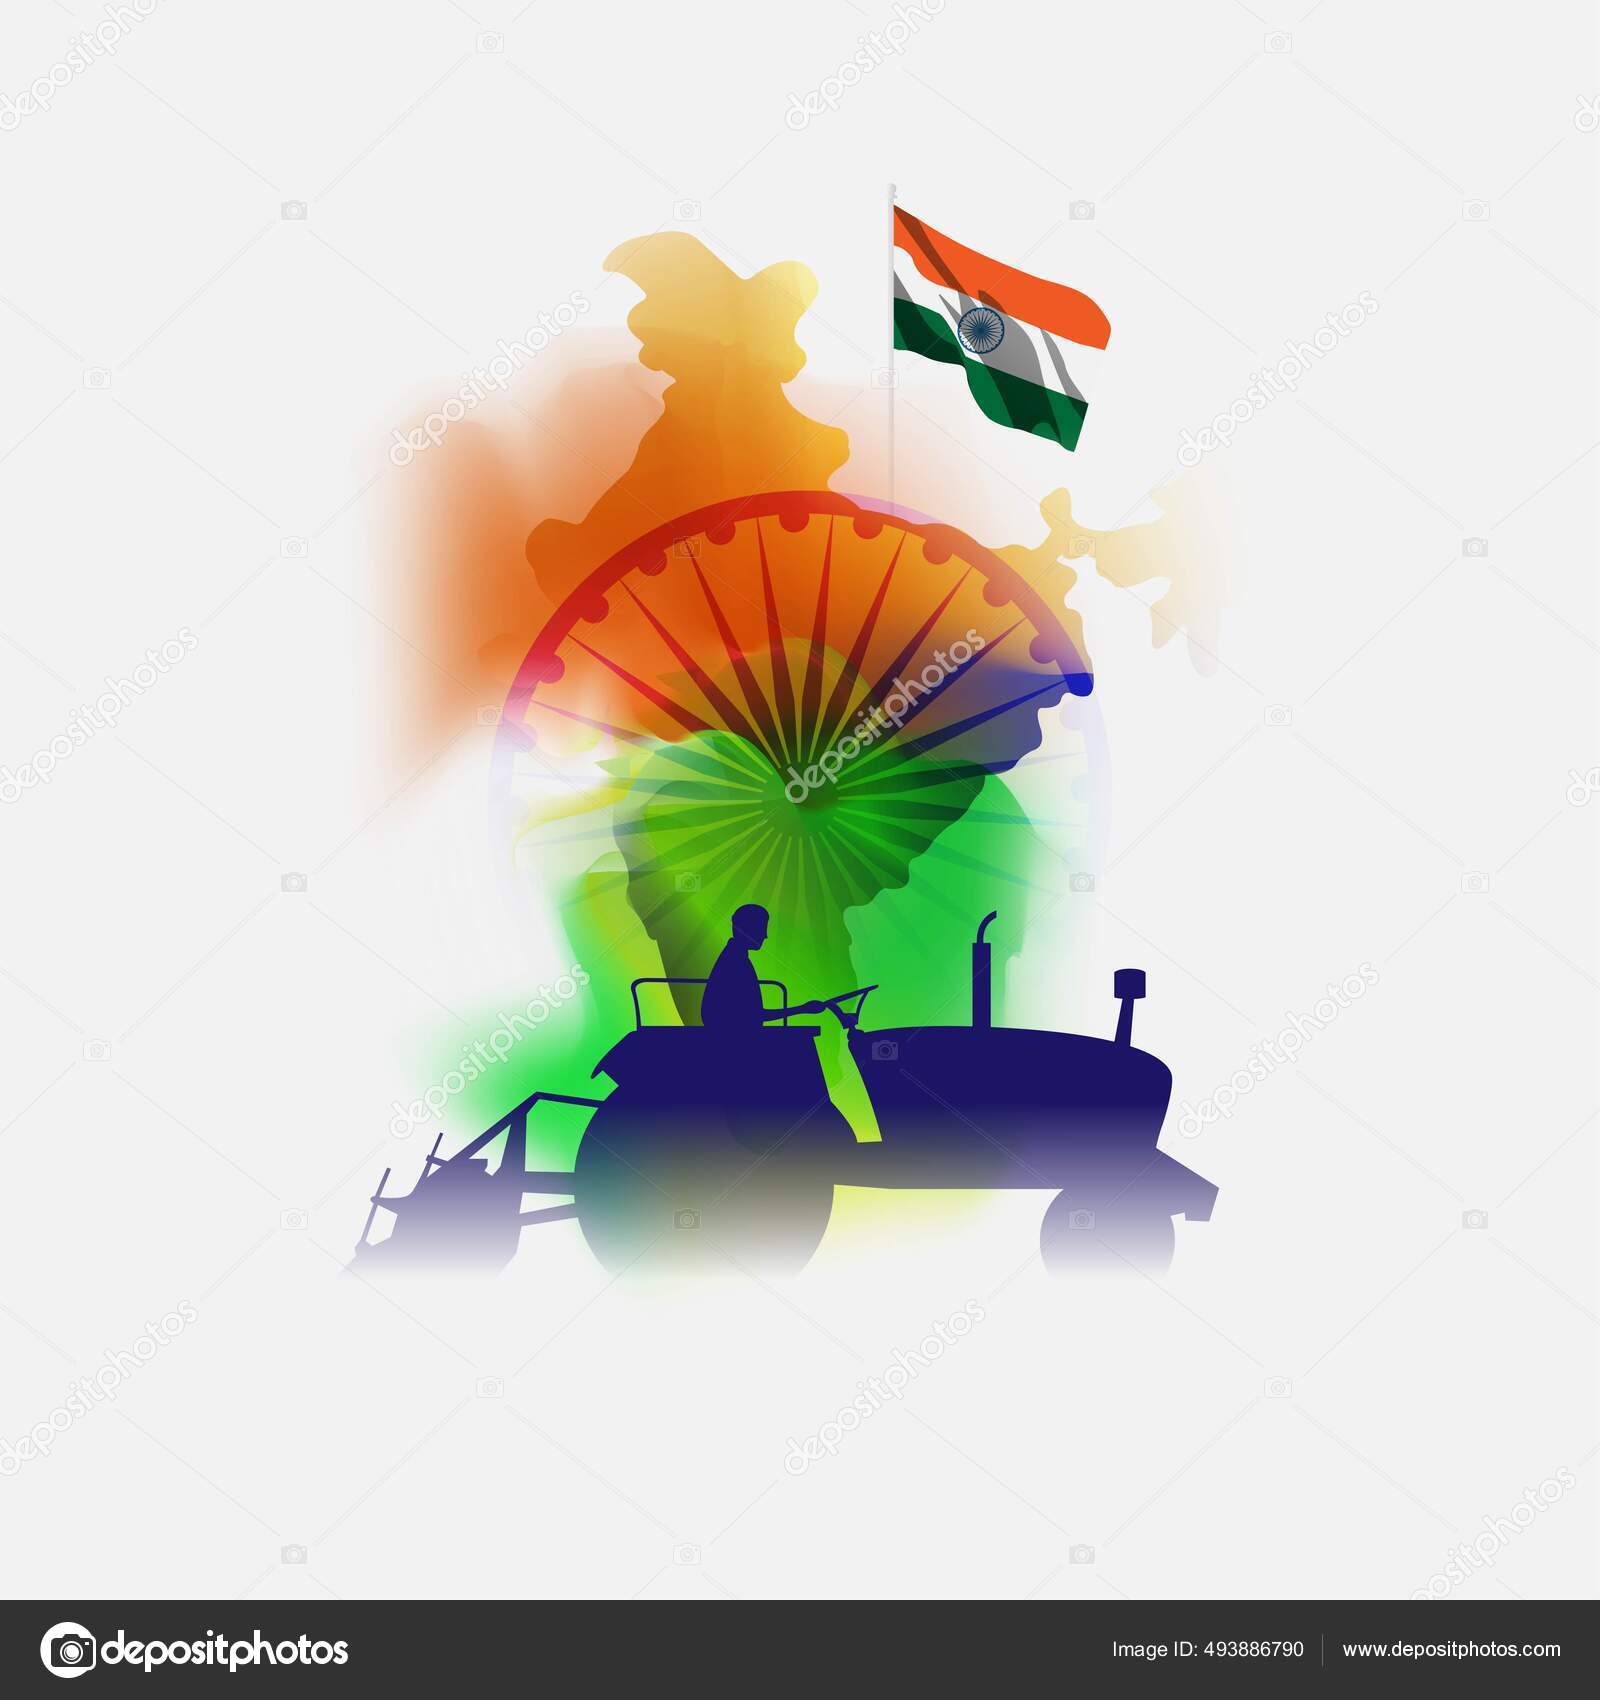 Download India Flag Picture HQ PNG Image  FreePNGImg